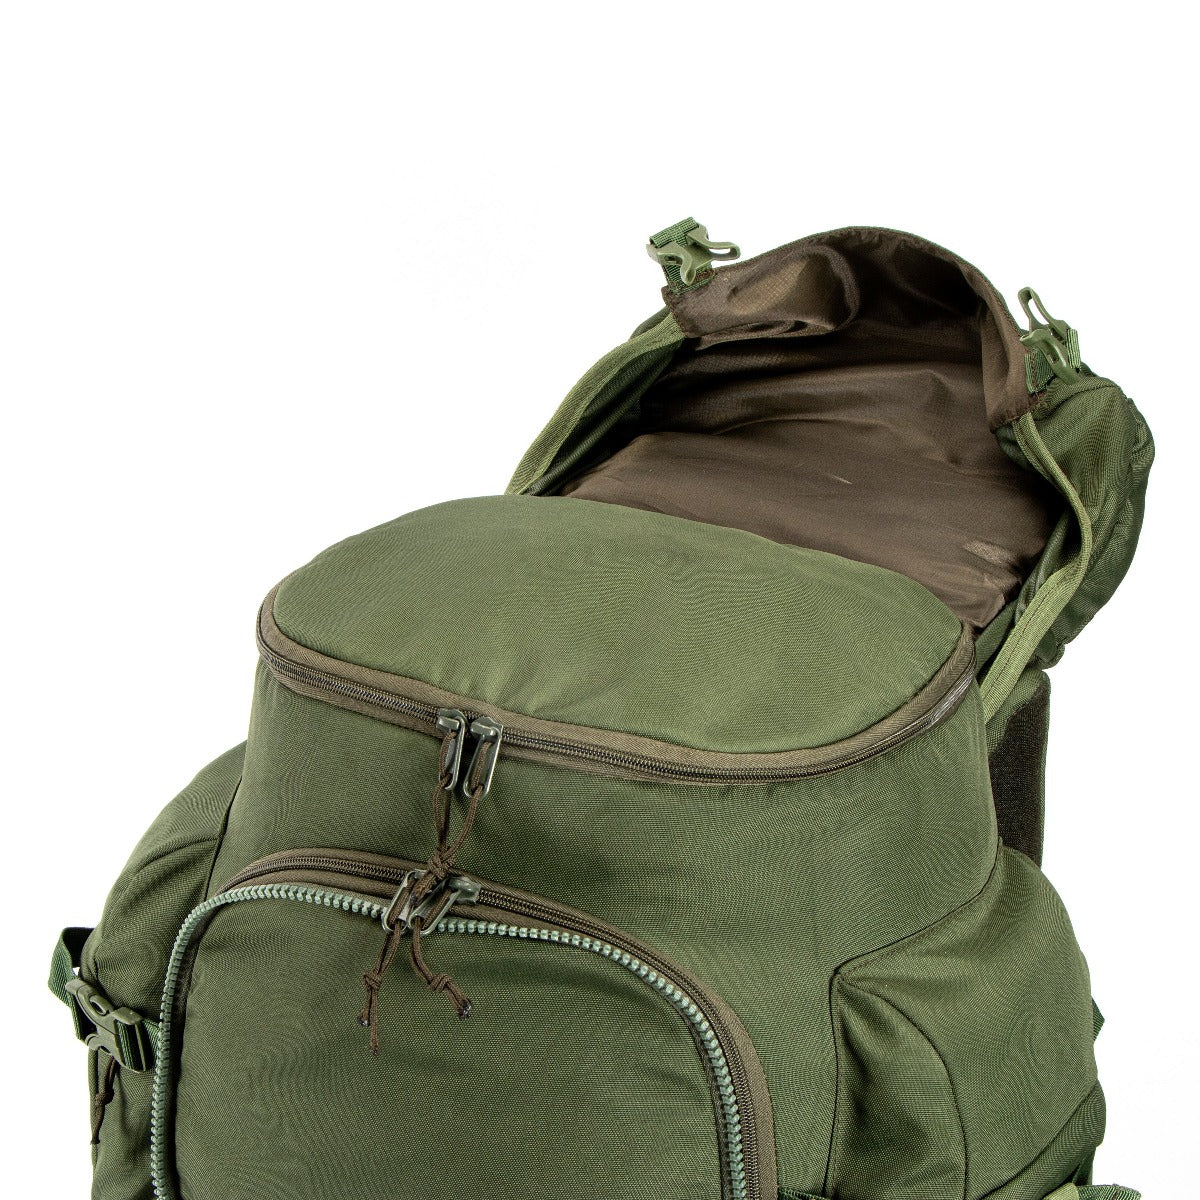 Colonel Pro Metal Frame Rucksack + Detachable Bag & Rain Cover - 105 Litres - Army Green 8